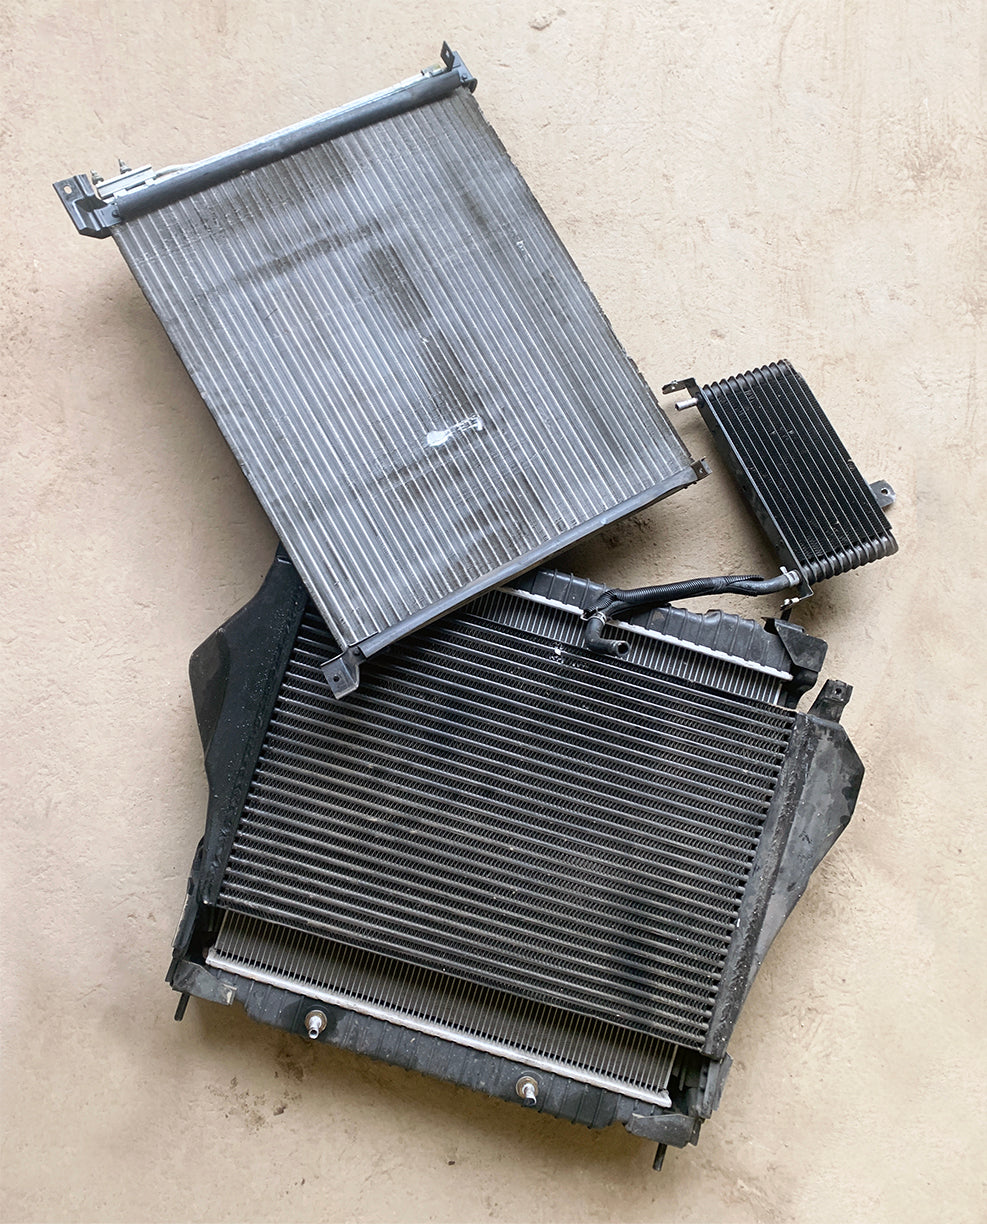 Ford E350 Radiator / Air-to-Air Cooler / AC Condenser / Oil Cooler Combo